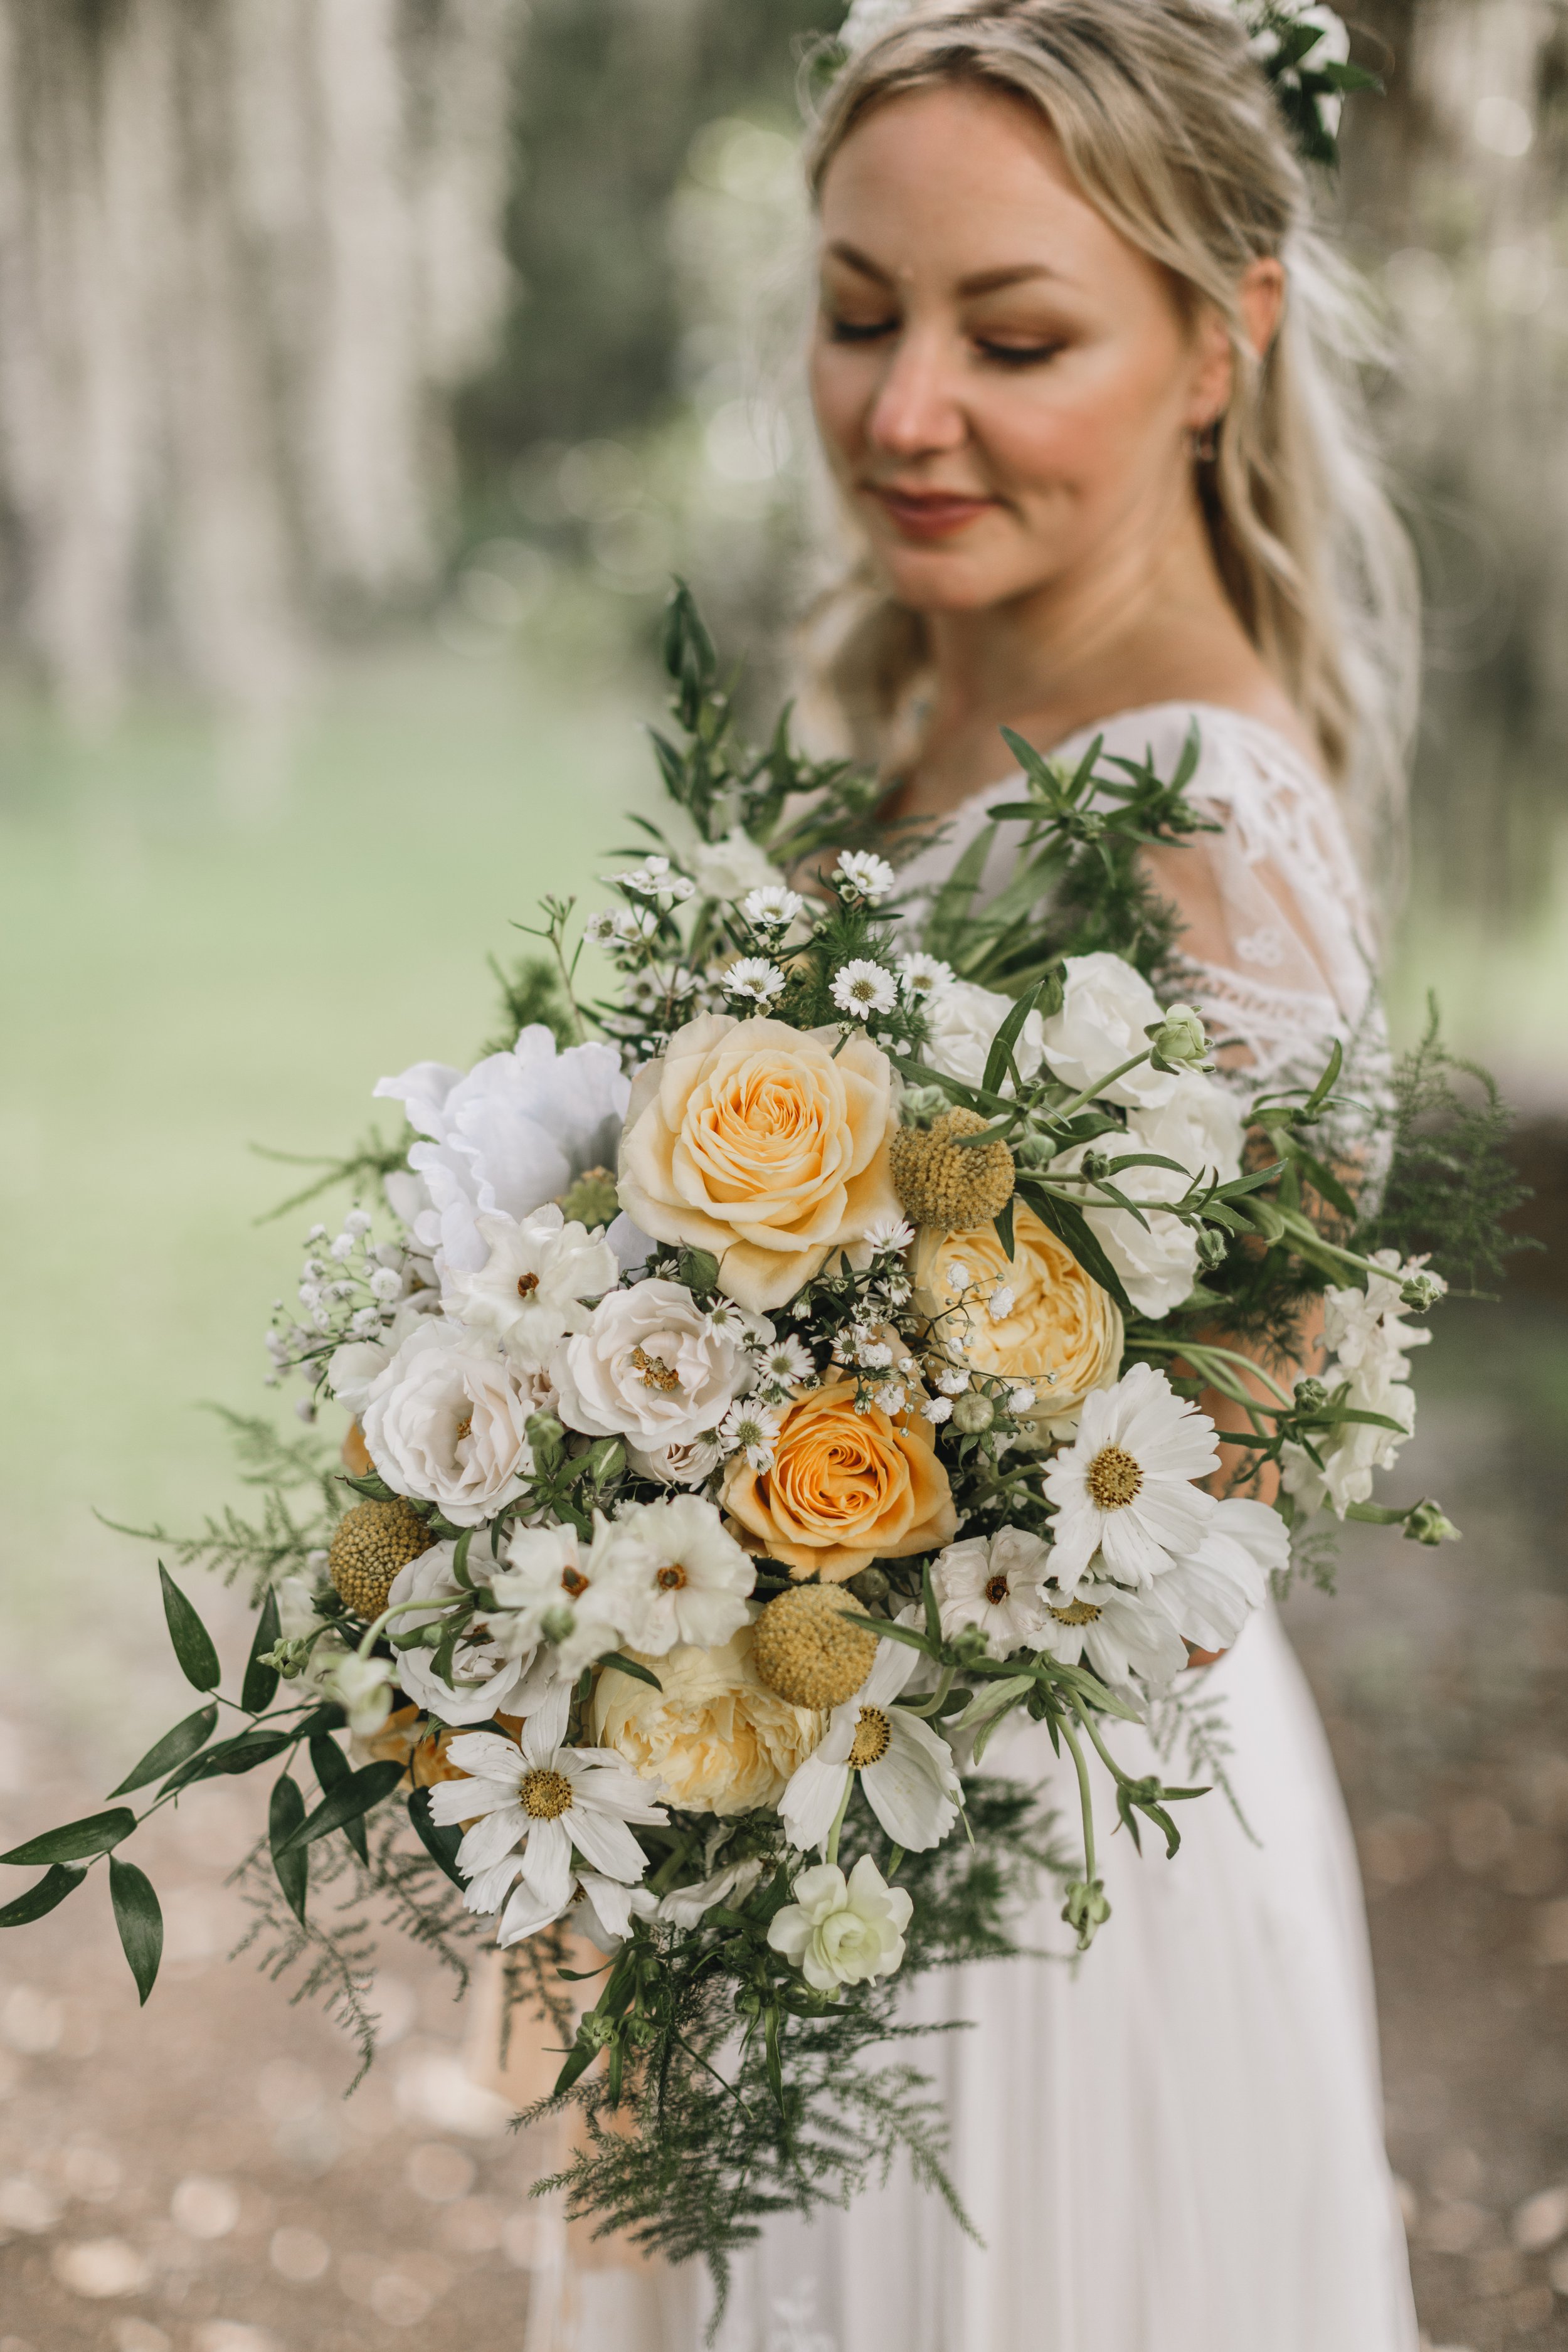 ivory-and-beau-wedding-and-florals-southern-wedding-savannah-florist-savannah-wedding-savannah-wedding-planner-the-wyld-dock-bar-historic-savannah-georgia-wedding-flowers-wedding-blog-wedding-inspiration-LAUREN+NICK_WEDDING-40.jpg